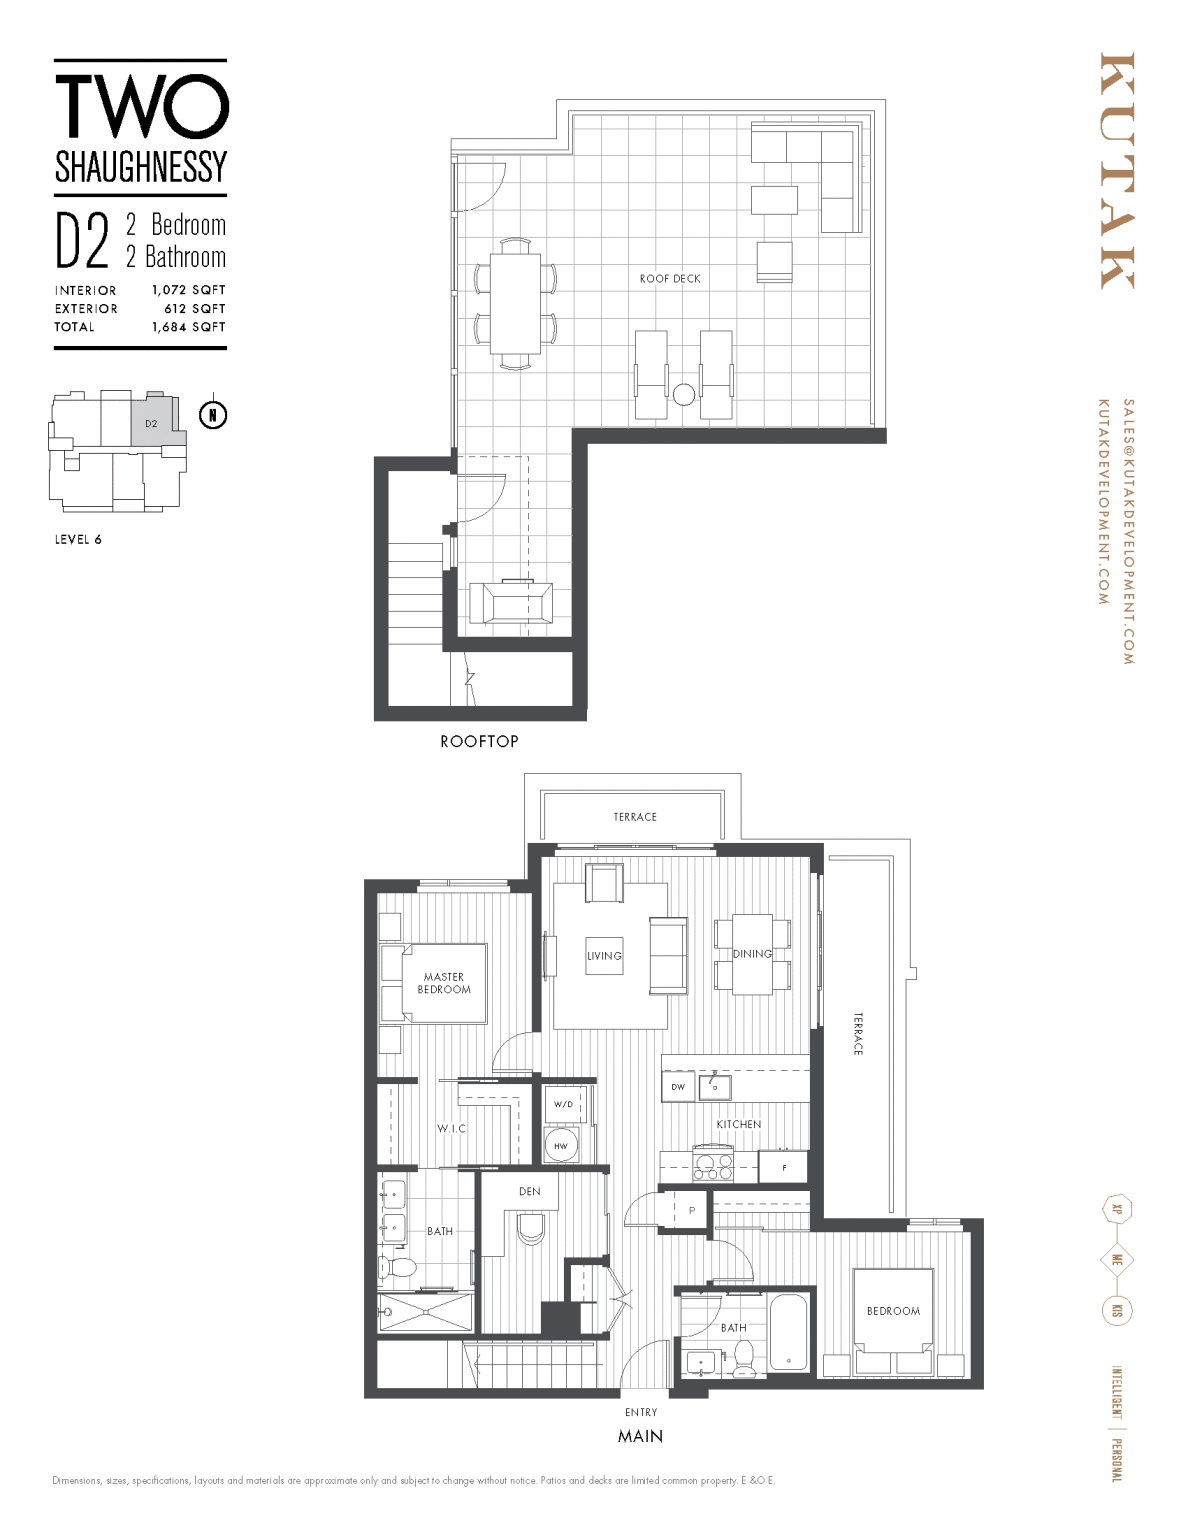 Two Shaughnessy Floor Plan D2